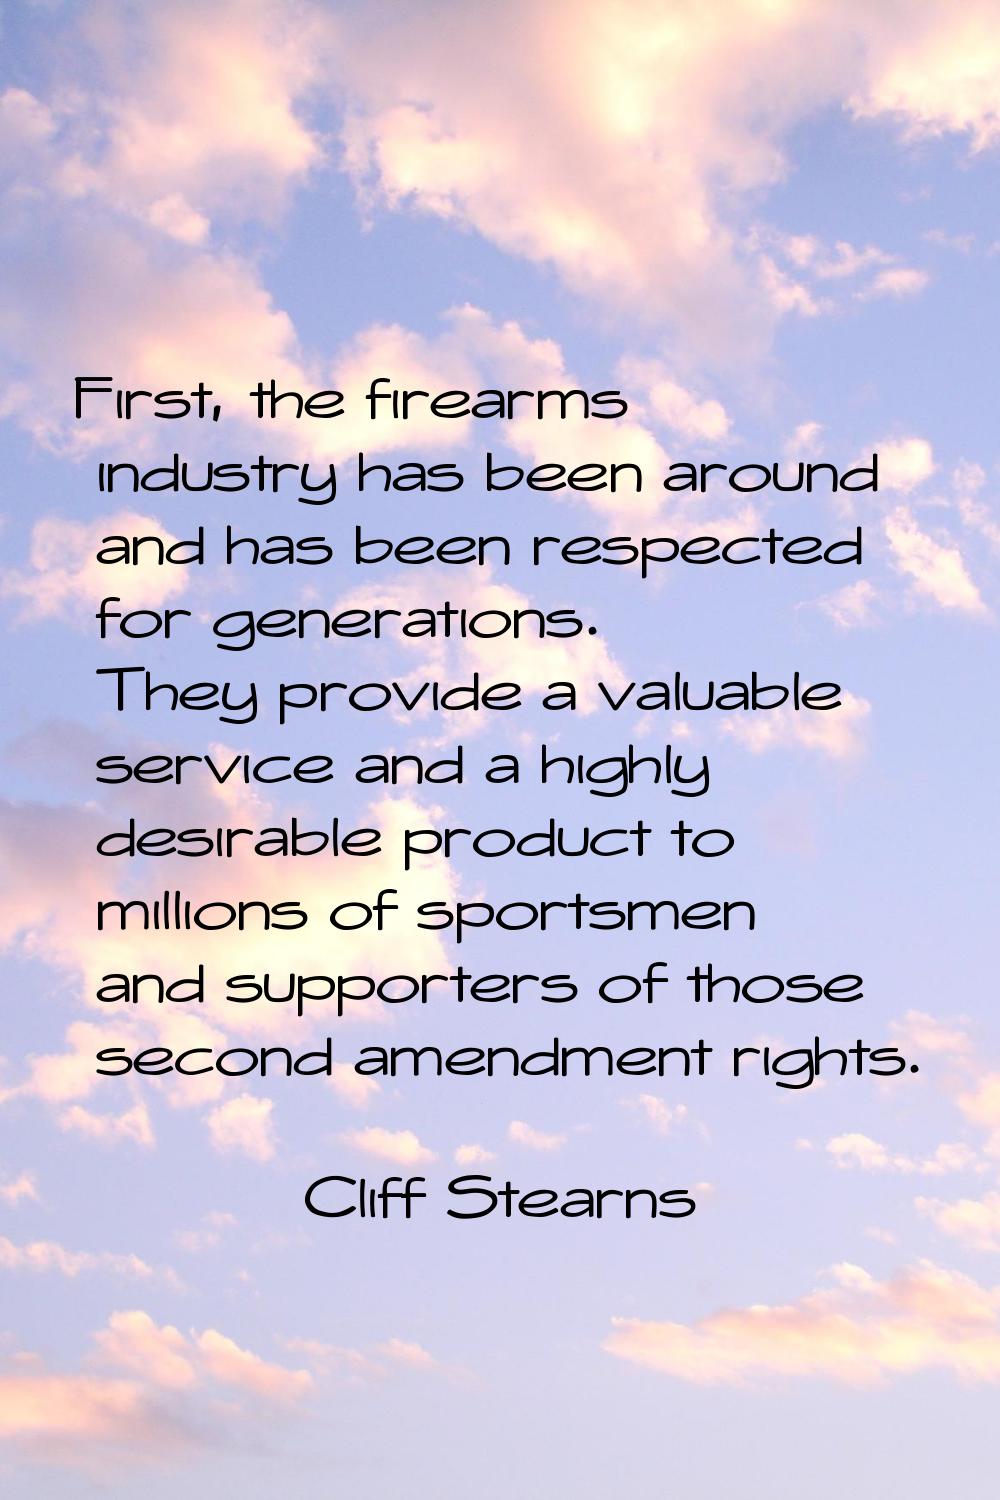 First, the firearms industry has been around and has been respected for generations. They provide a